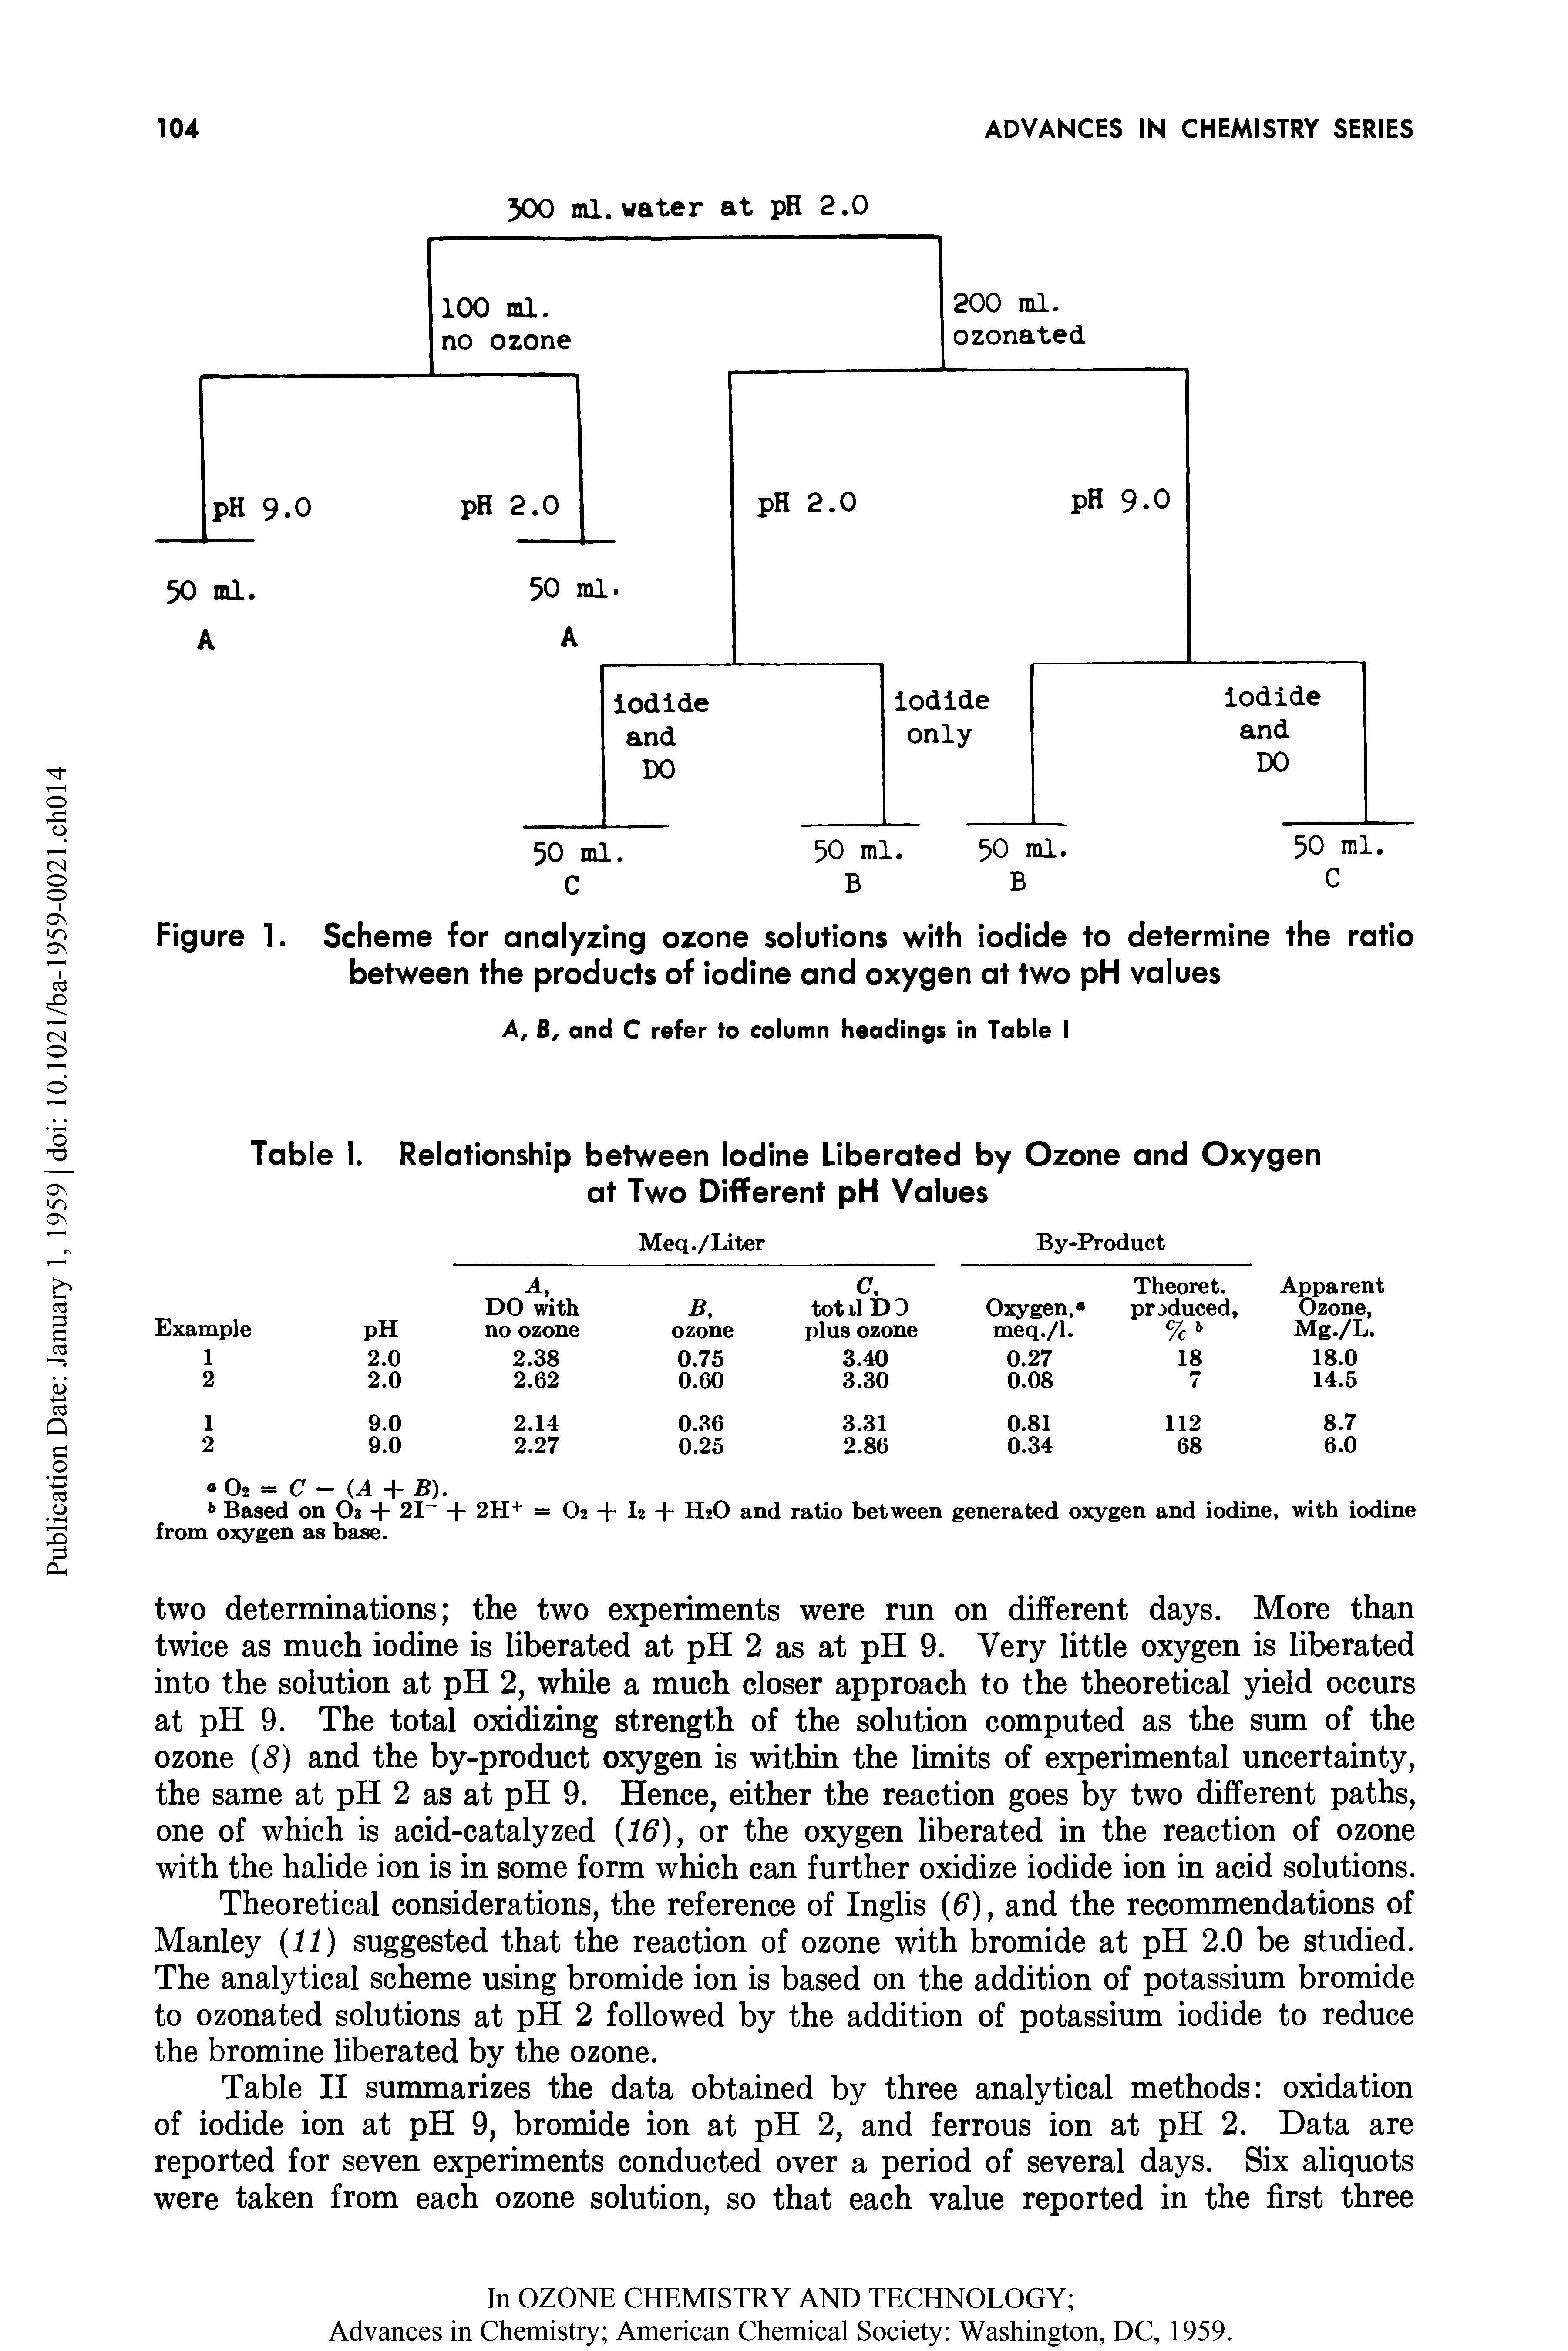 Table II summarizes the data obtained by three analytical methods oxidation of iodide ion at pH 9, bromide ion at pH 2, and ferrous ion at pH 2. Data are reported for seven experiments conducted over a period of several days. Six aliquots were taken from each ozone solution, so that each value reported in the first three...